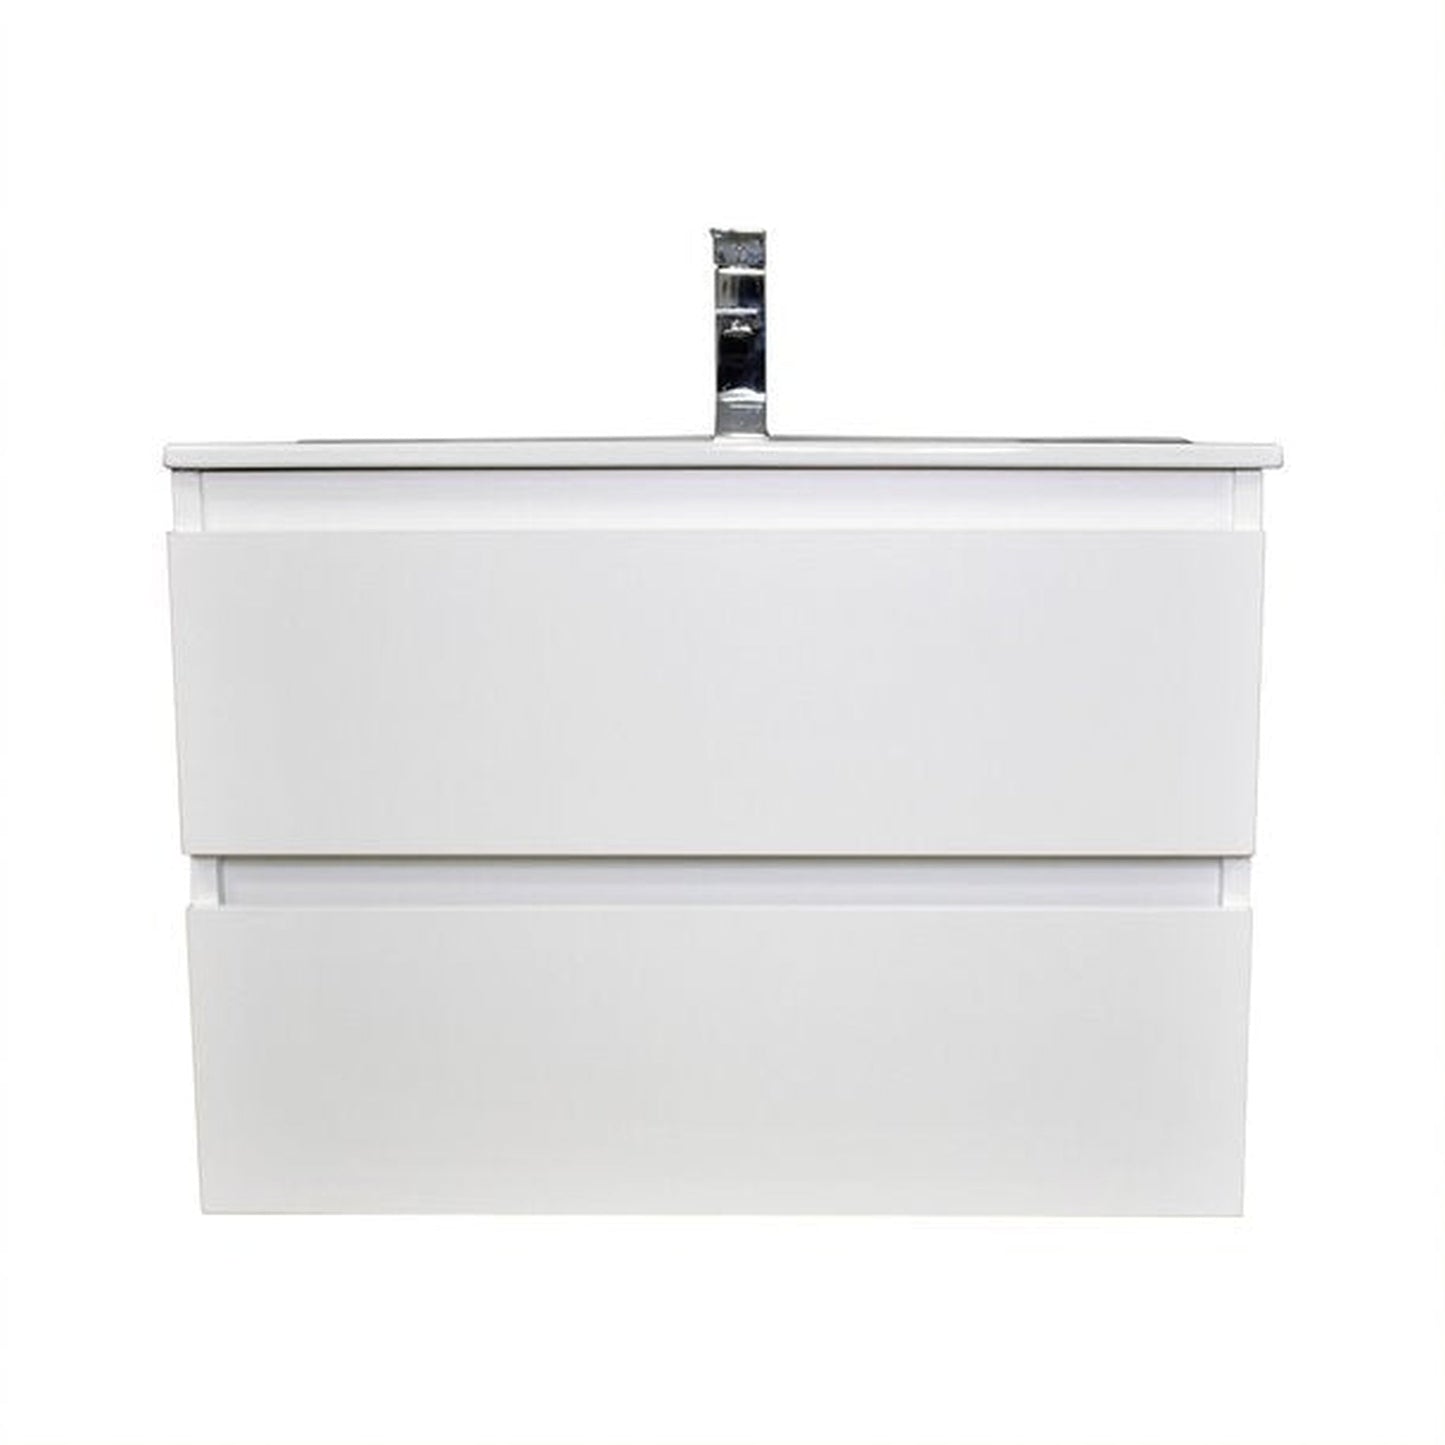 Volpa USA Salt 24" x 18" Gloss White Wall-Mounted Floating Bathroom Vanity With Drawers, Integrated Porcelain Ceramic Top and Ceramic Sink